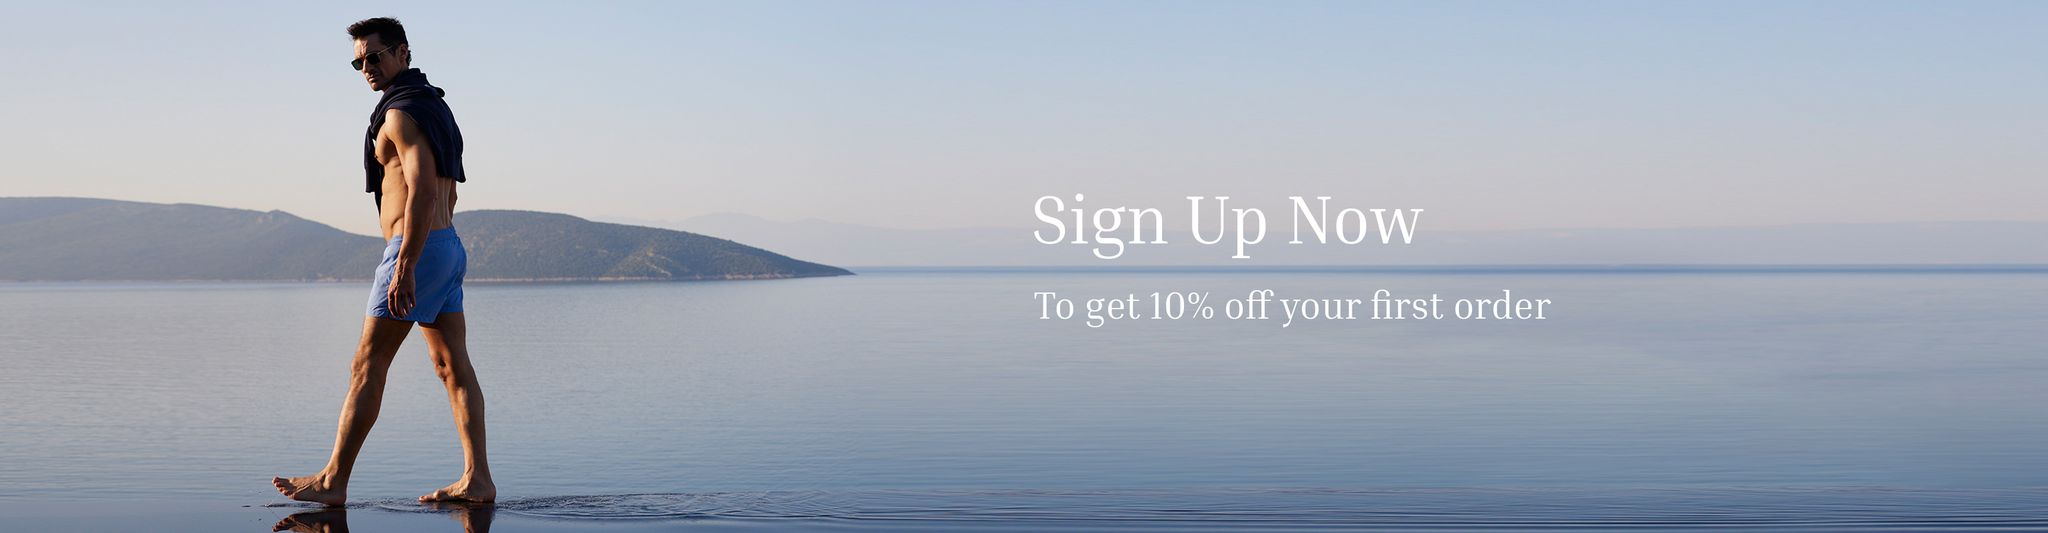 sign up now to get 10% off your first order